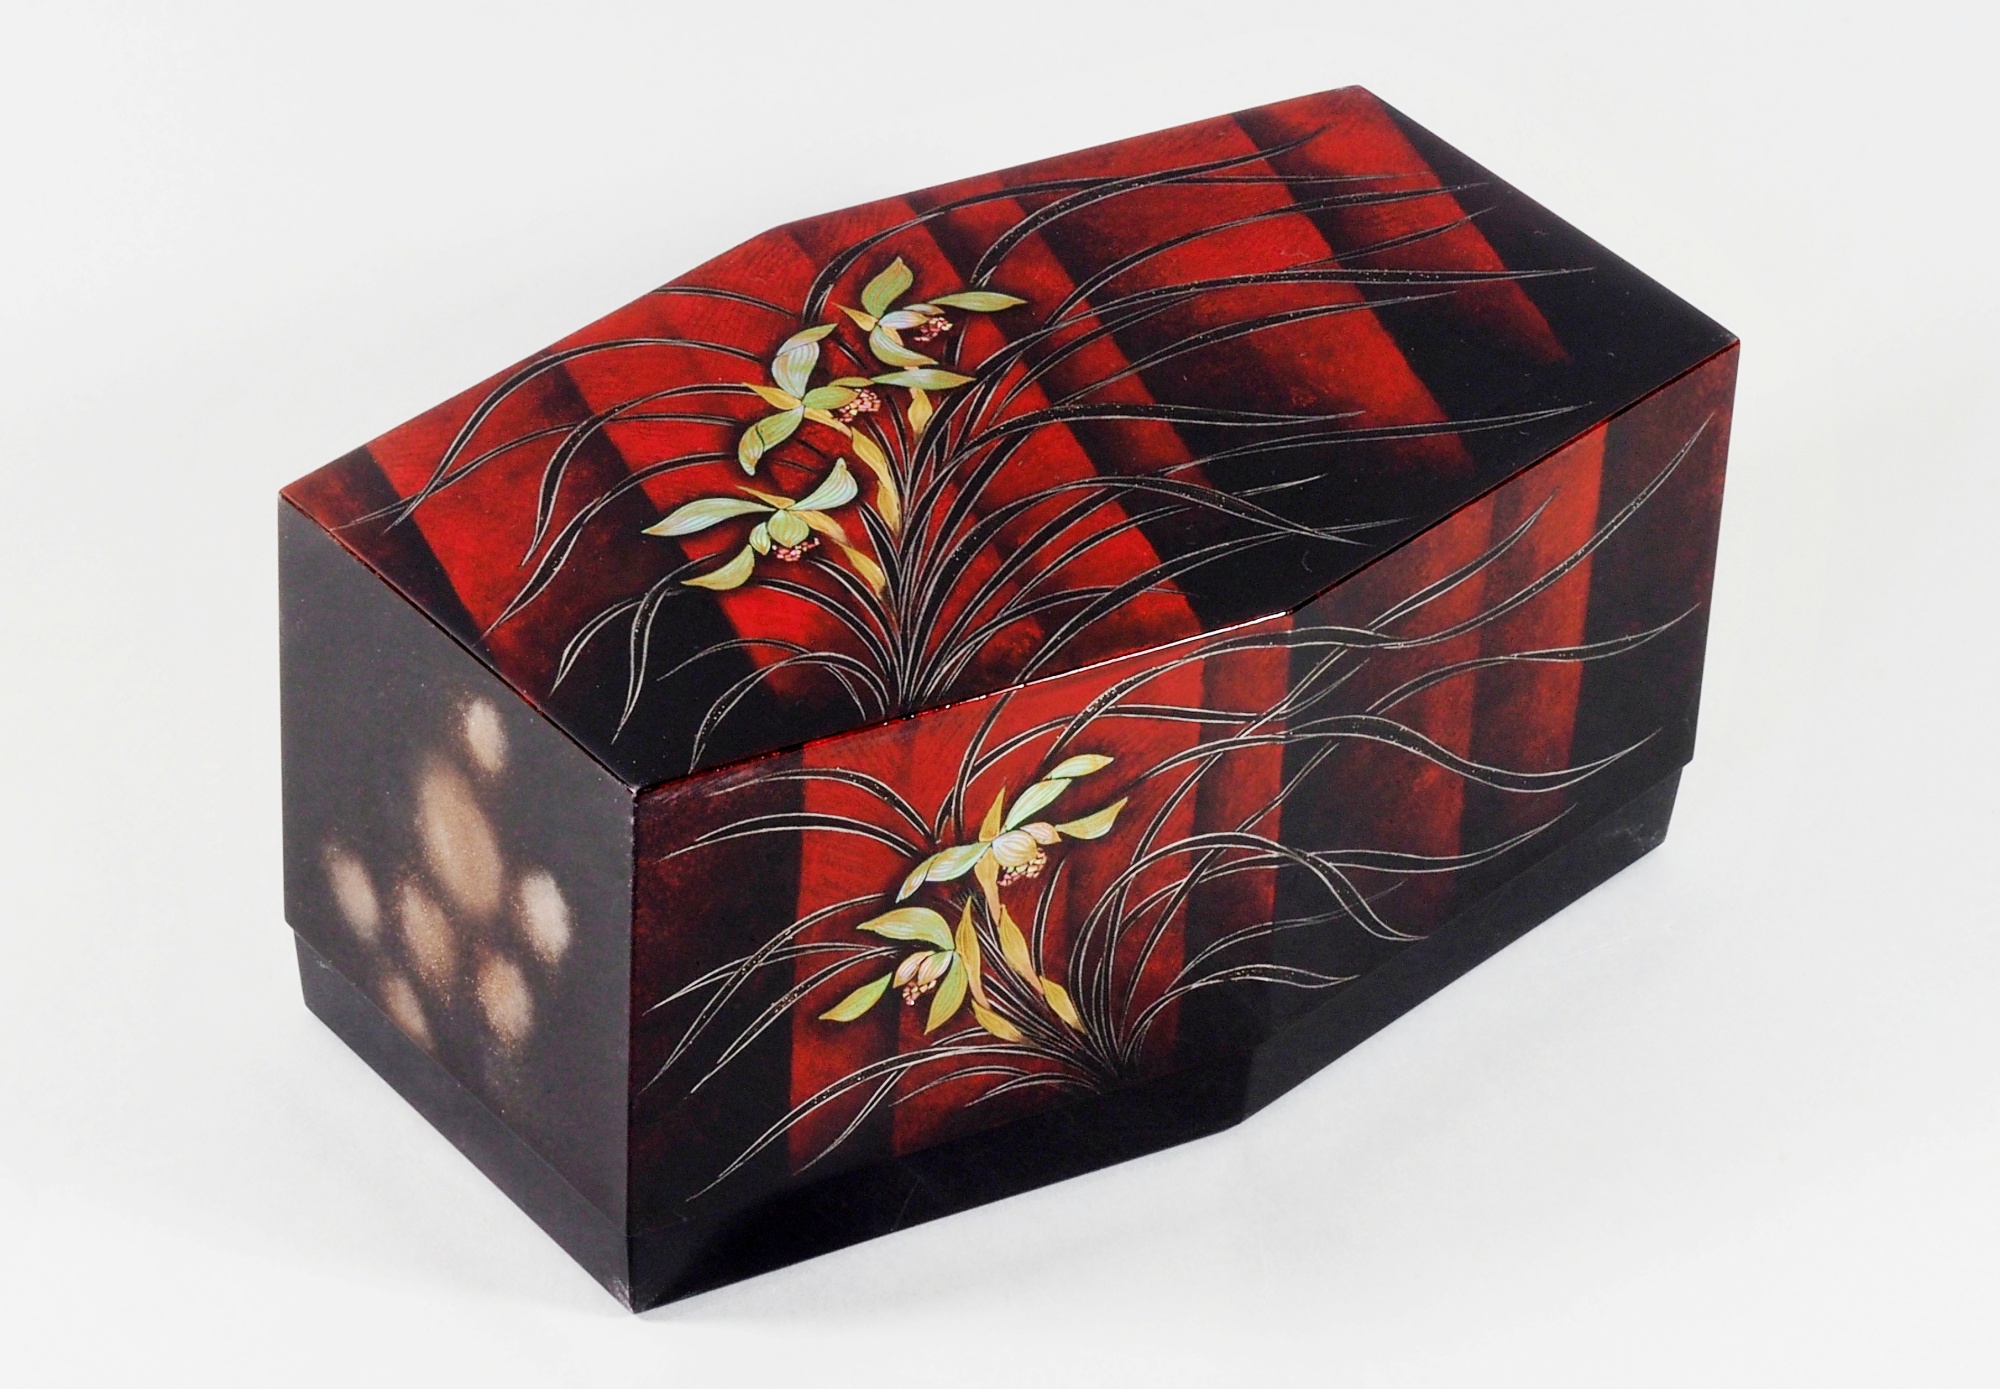 photo Hexagonal Box with Design in Makie - Sunlight Filtering Through the Leaves